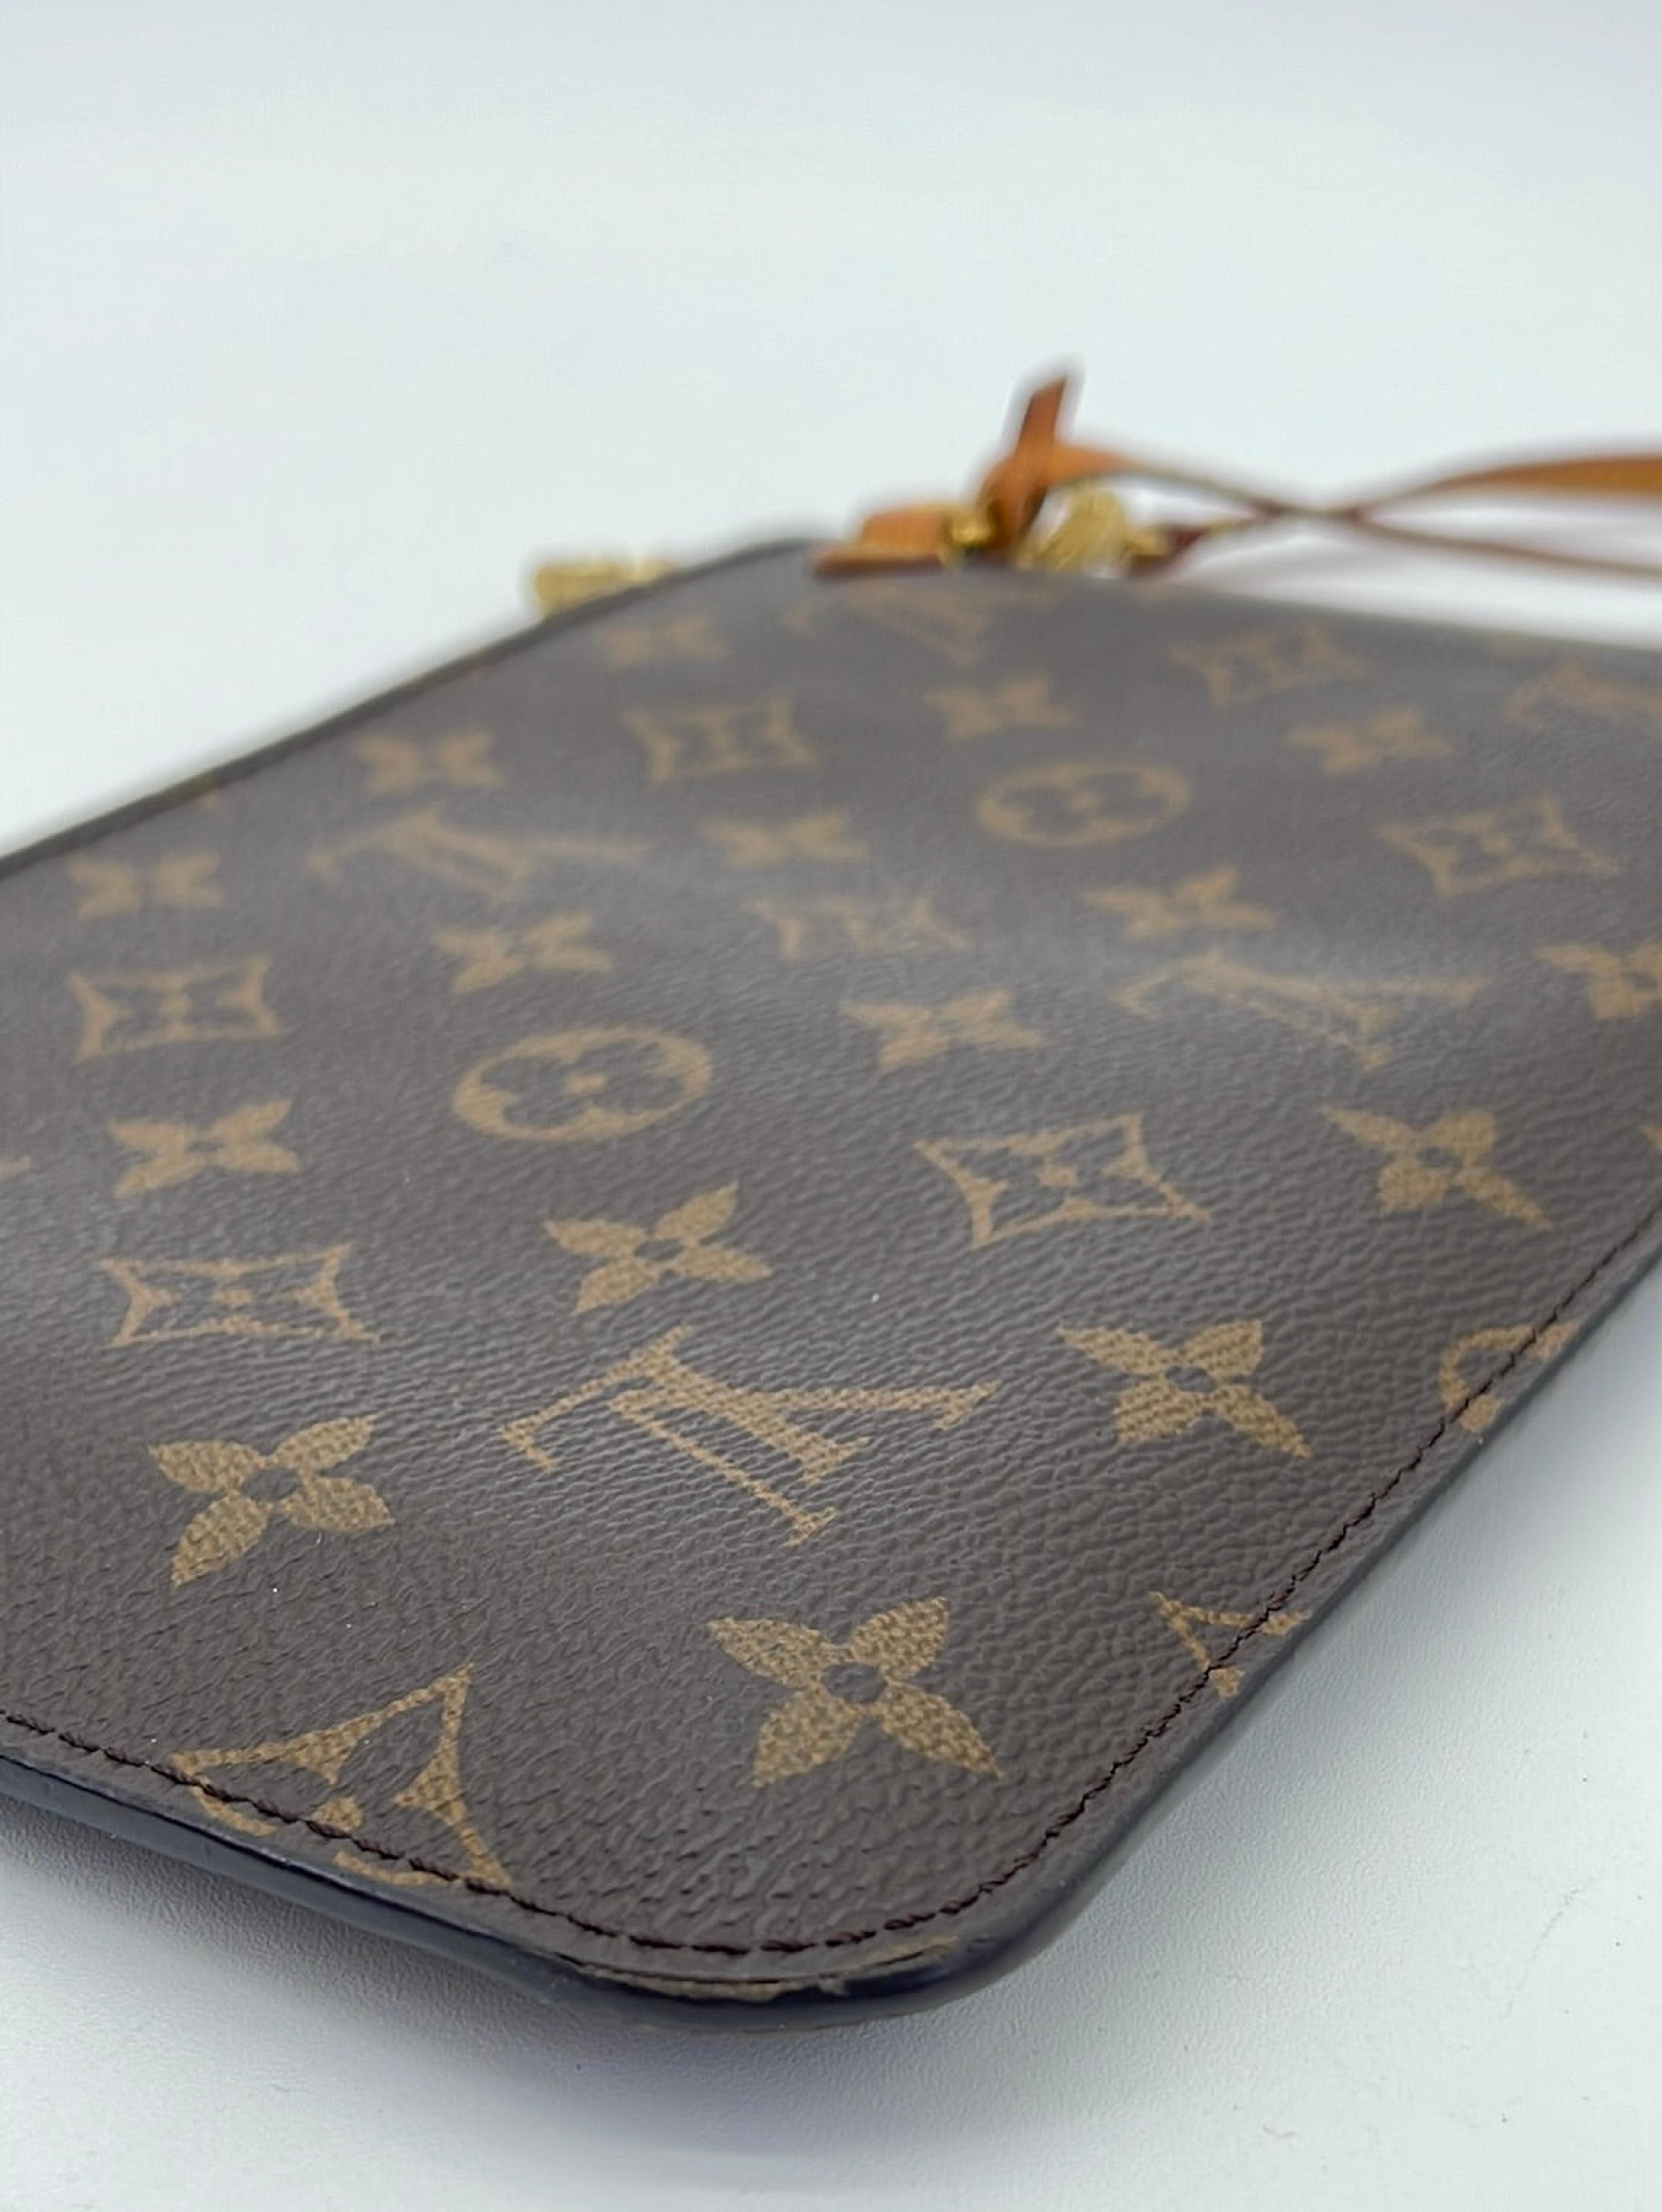 NTWRK - Preloved Louis Vuitton Monogram Neverfull Large Pouch SF4199 070